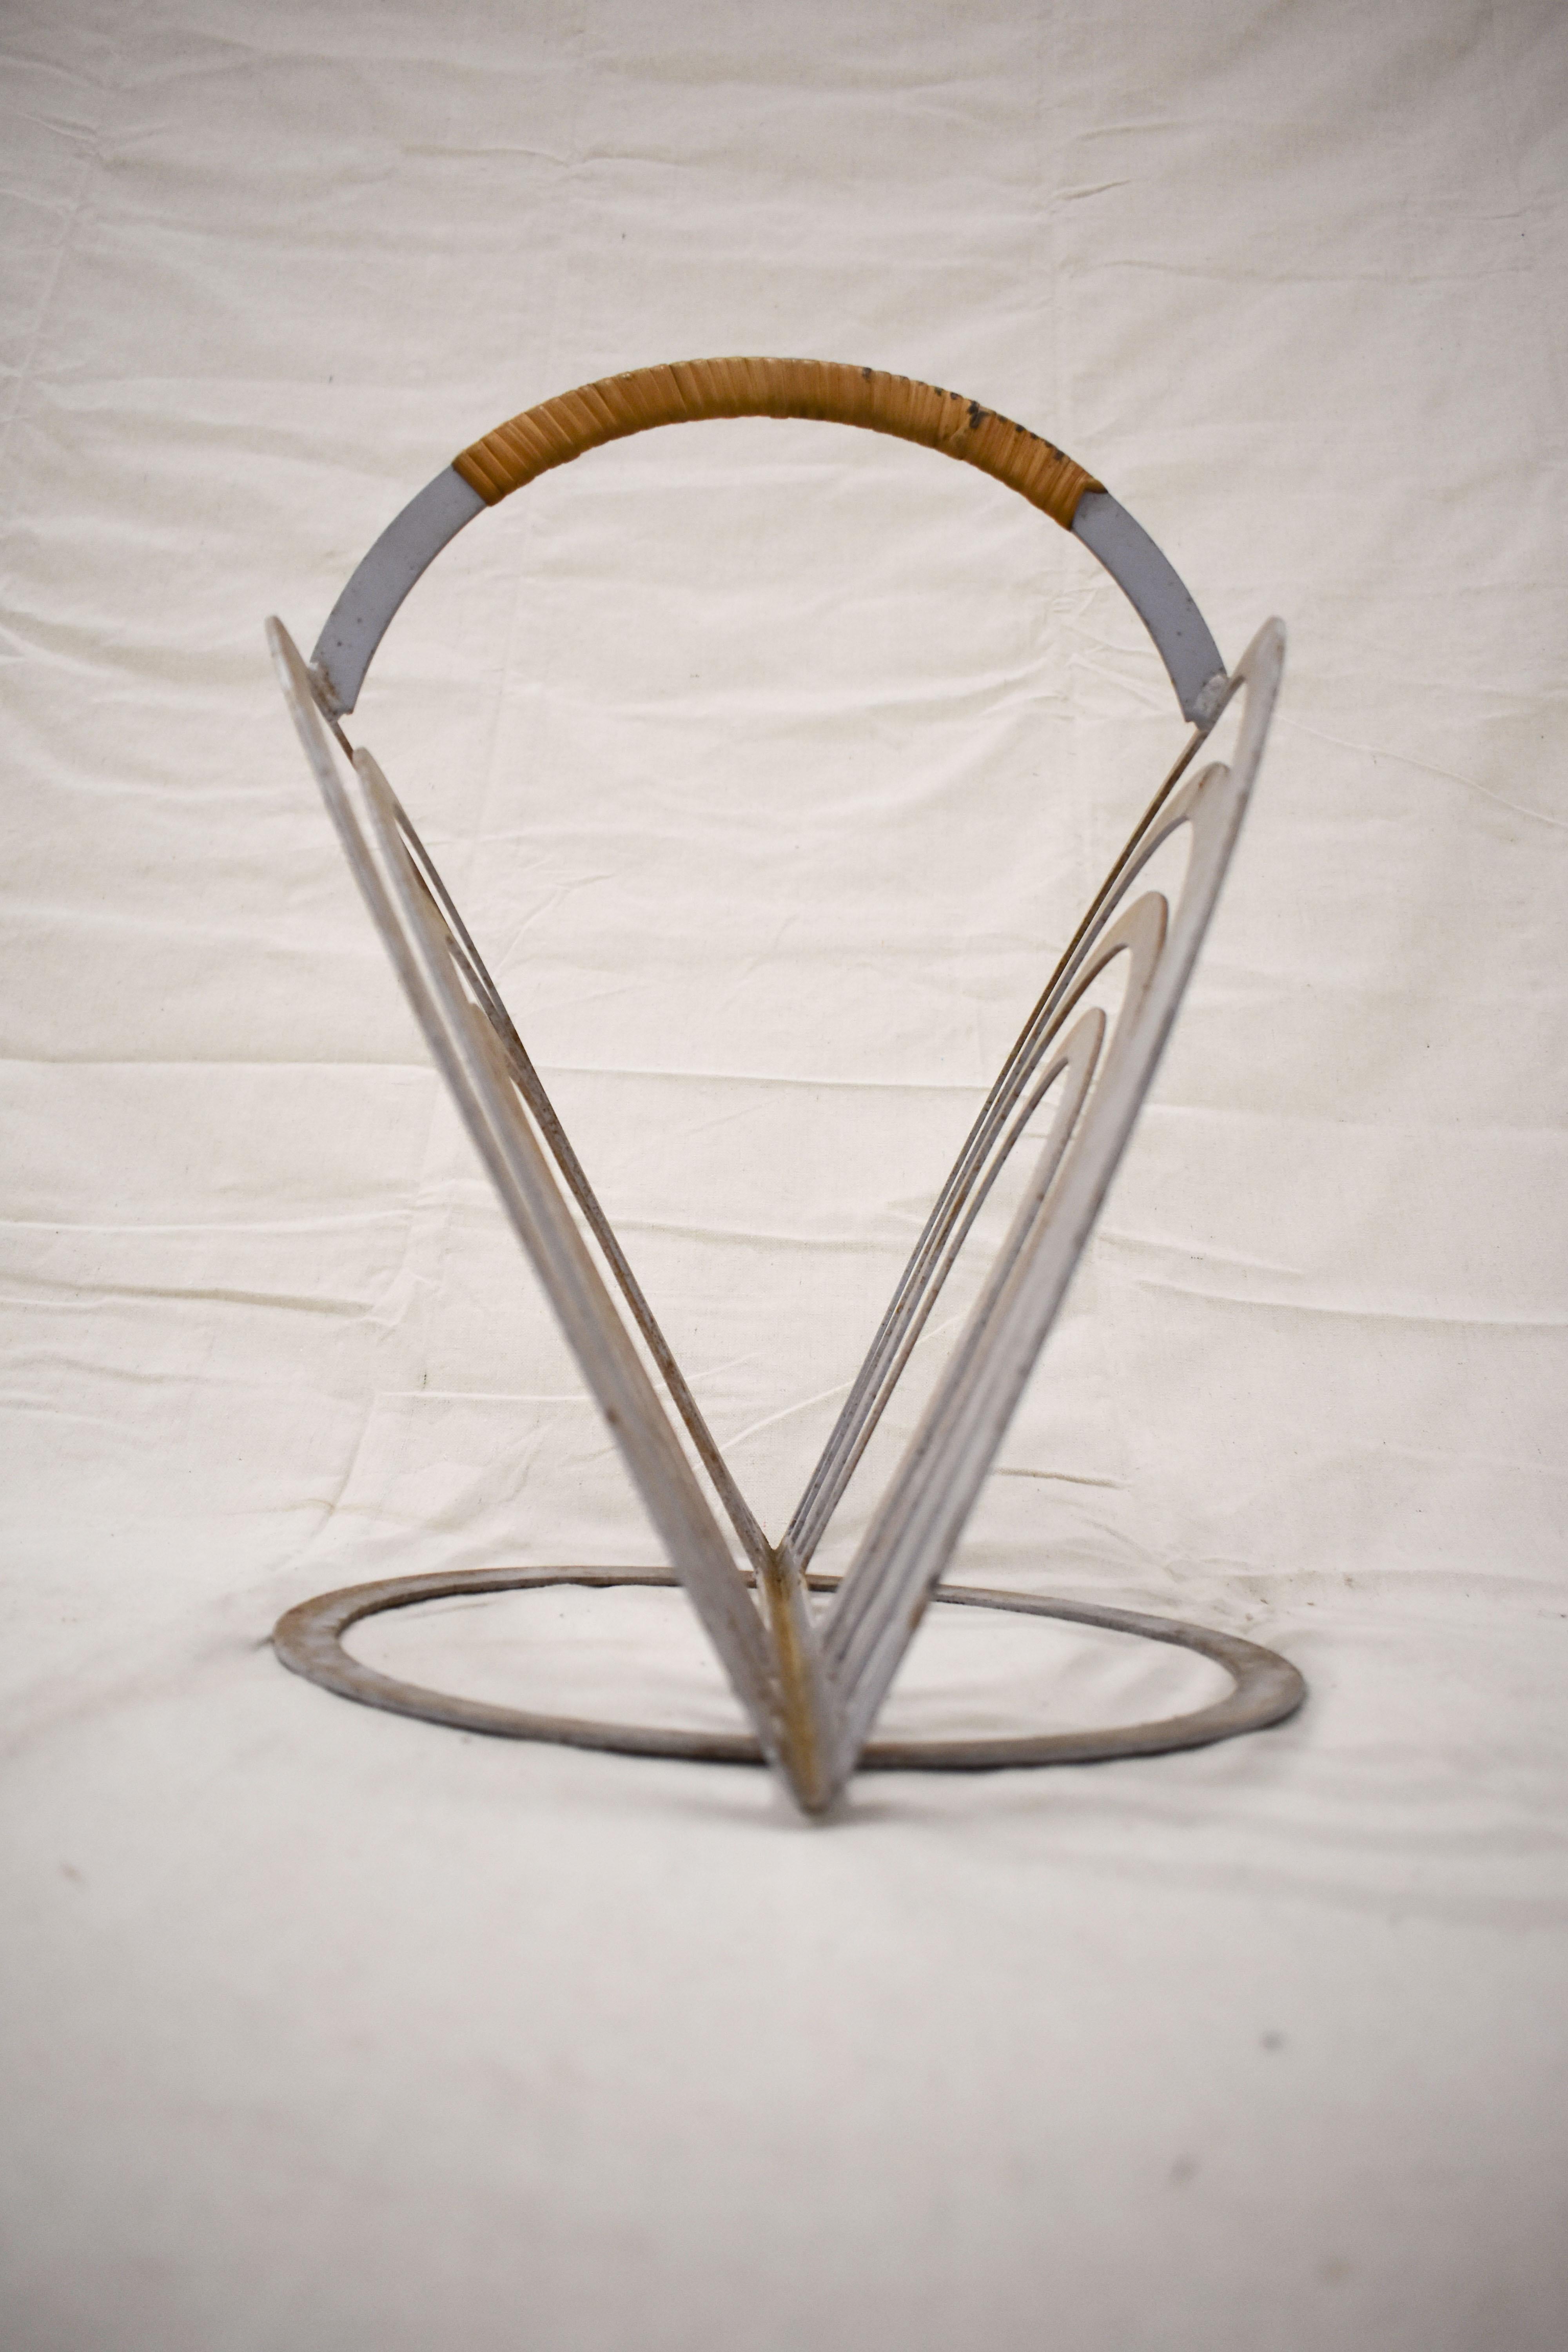 Rare Arthur Umanoff designed magazine rack utilizing his trademark rattan wrapped handle. In good vintage condition with surface rust consistent with use and age.